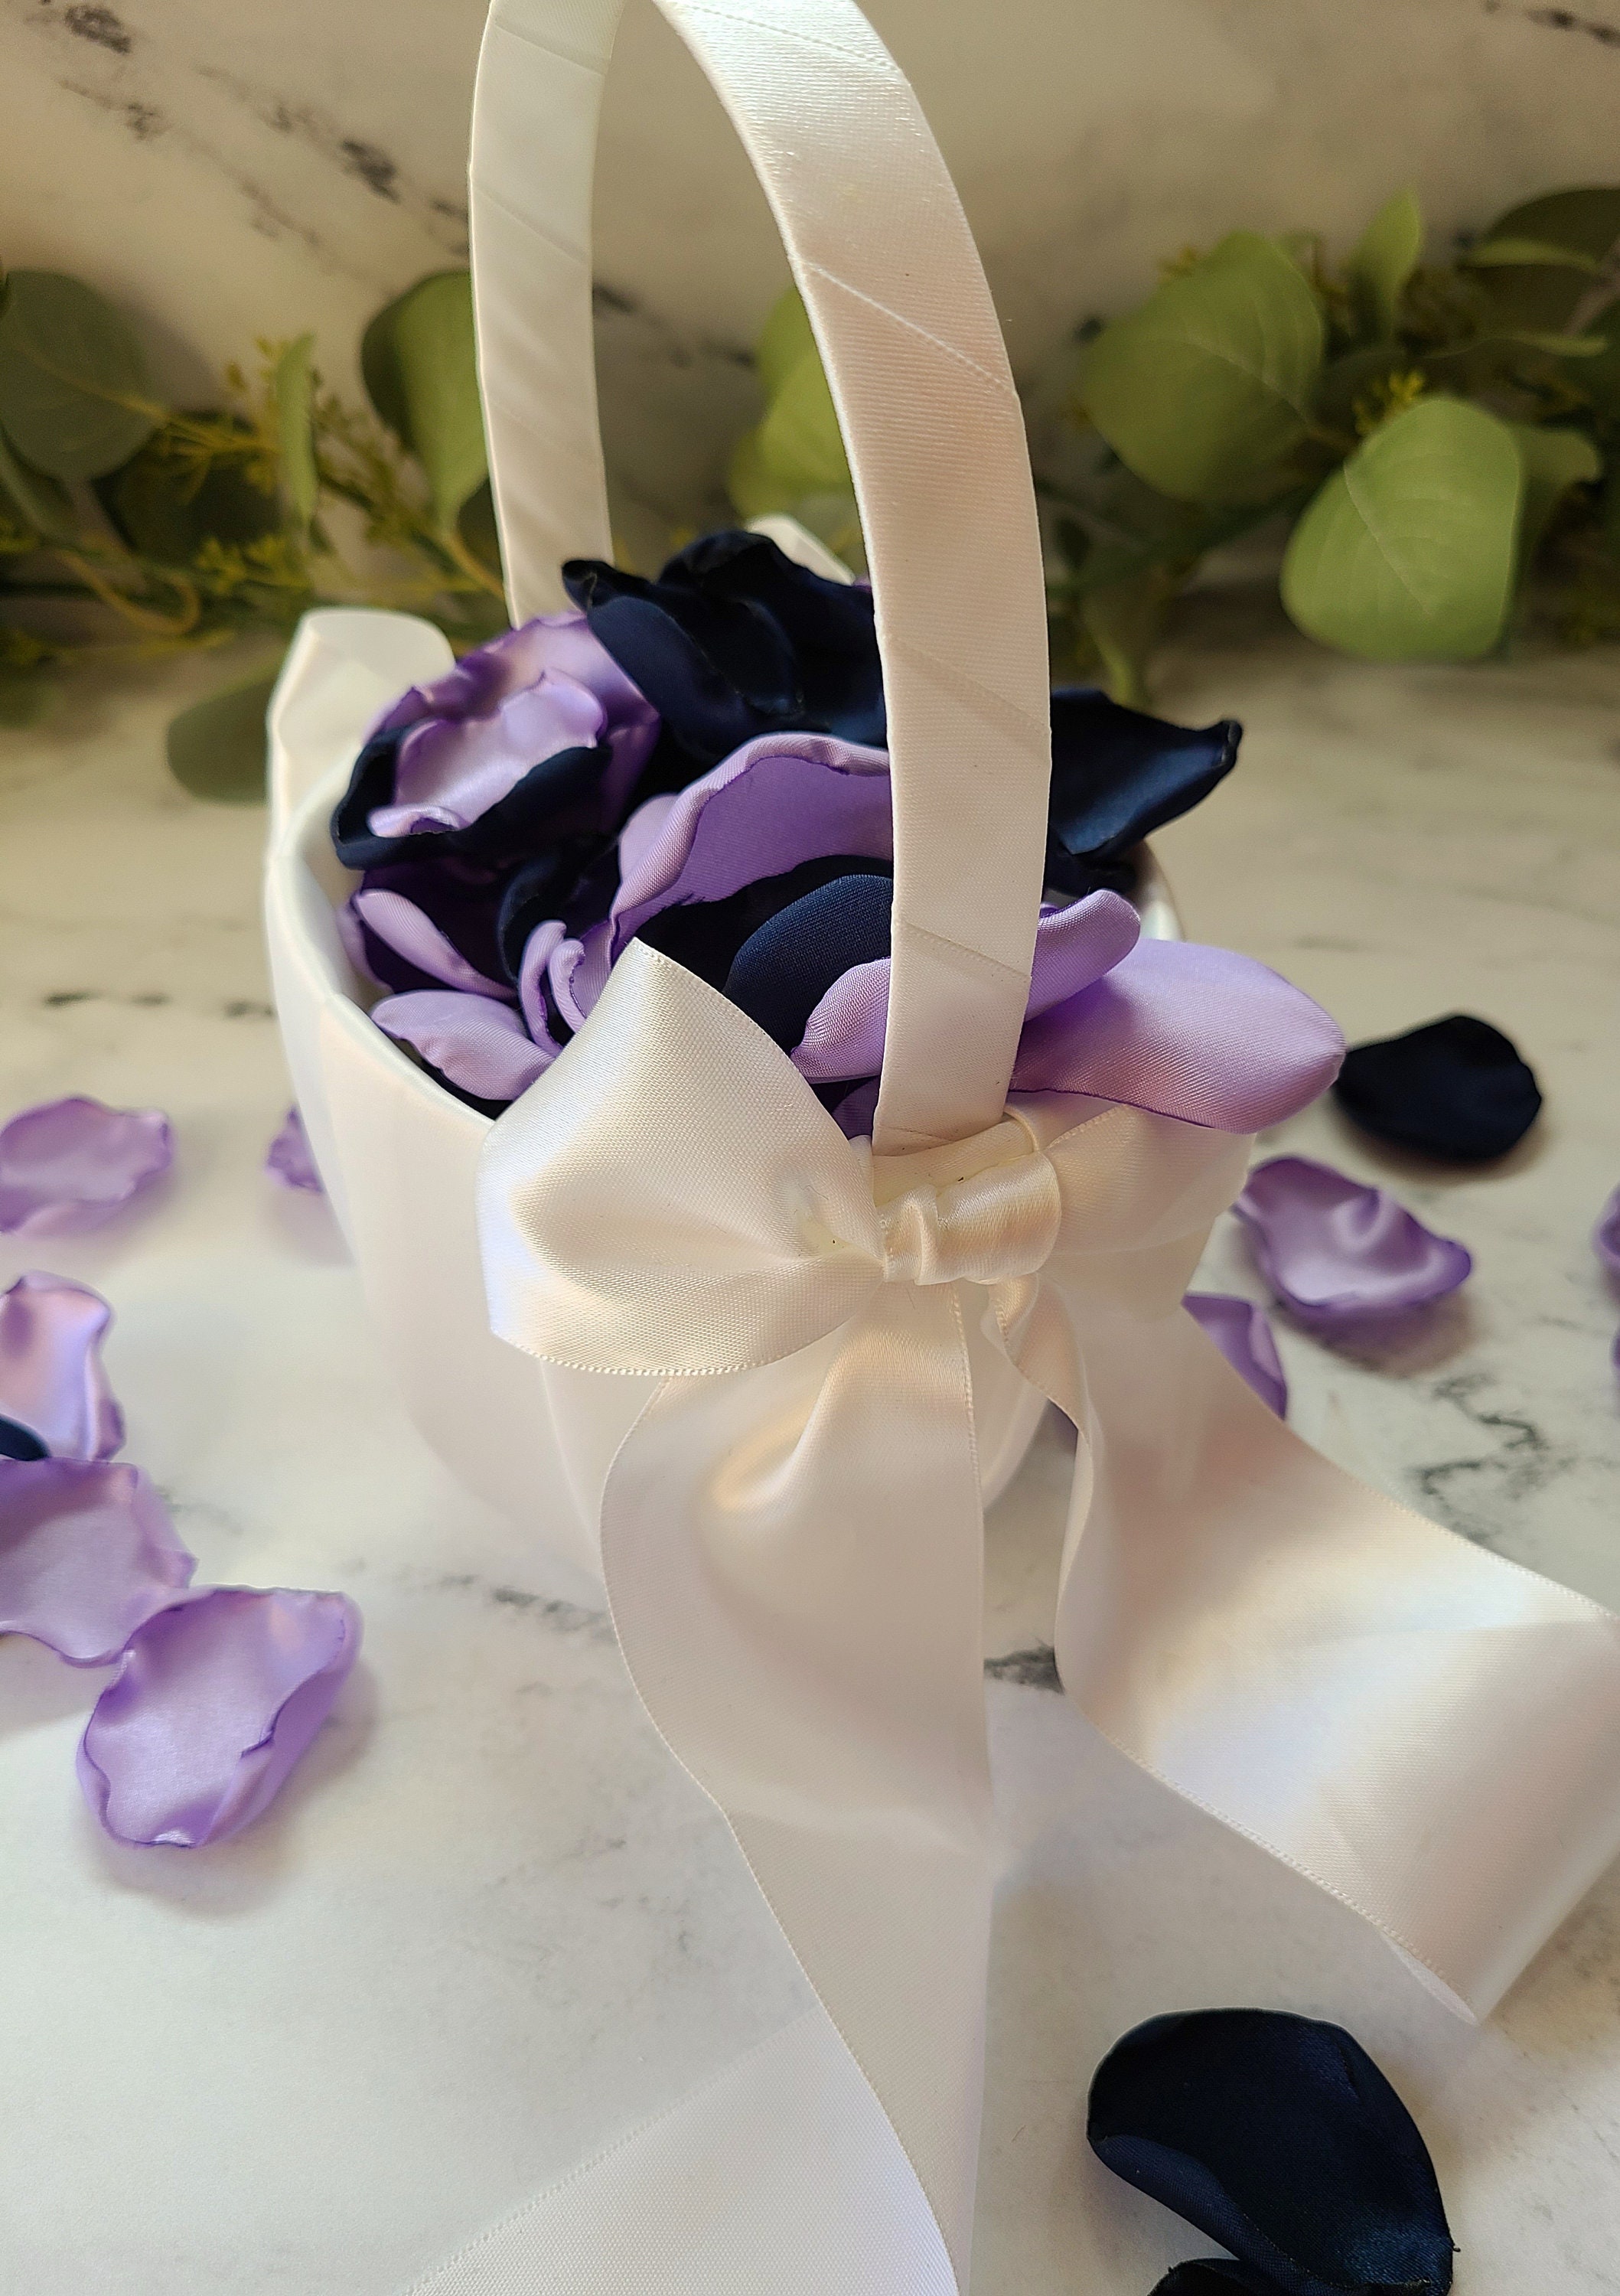 Wedding Traditional Decor-lavender Silver Rose Petals Decorations-flower  Girl Petals-glam Bridal Shower Decor-cards and Gifts Table Toss 